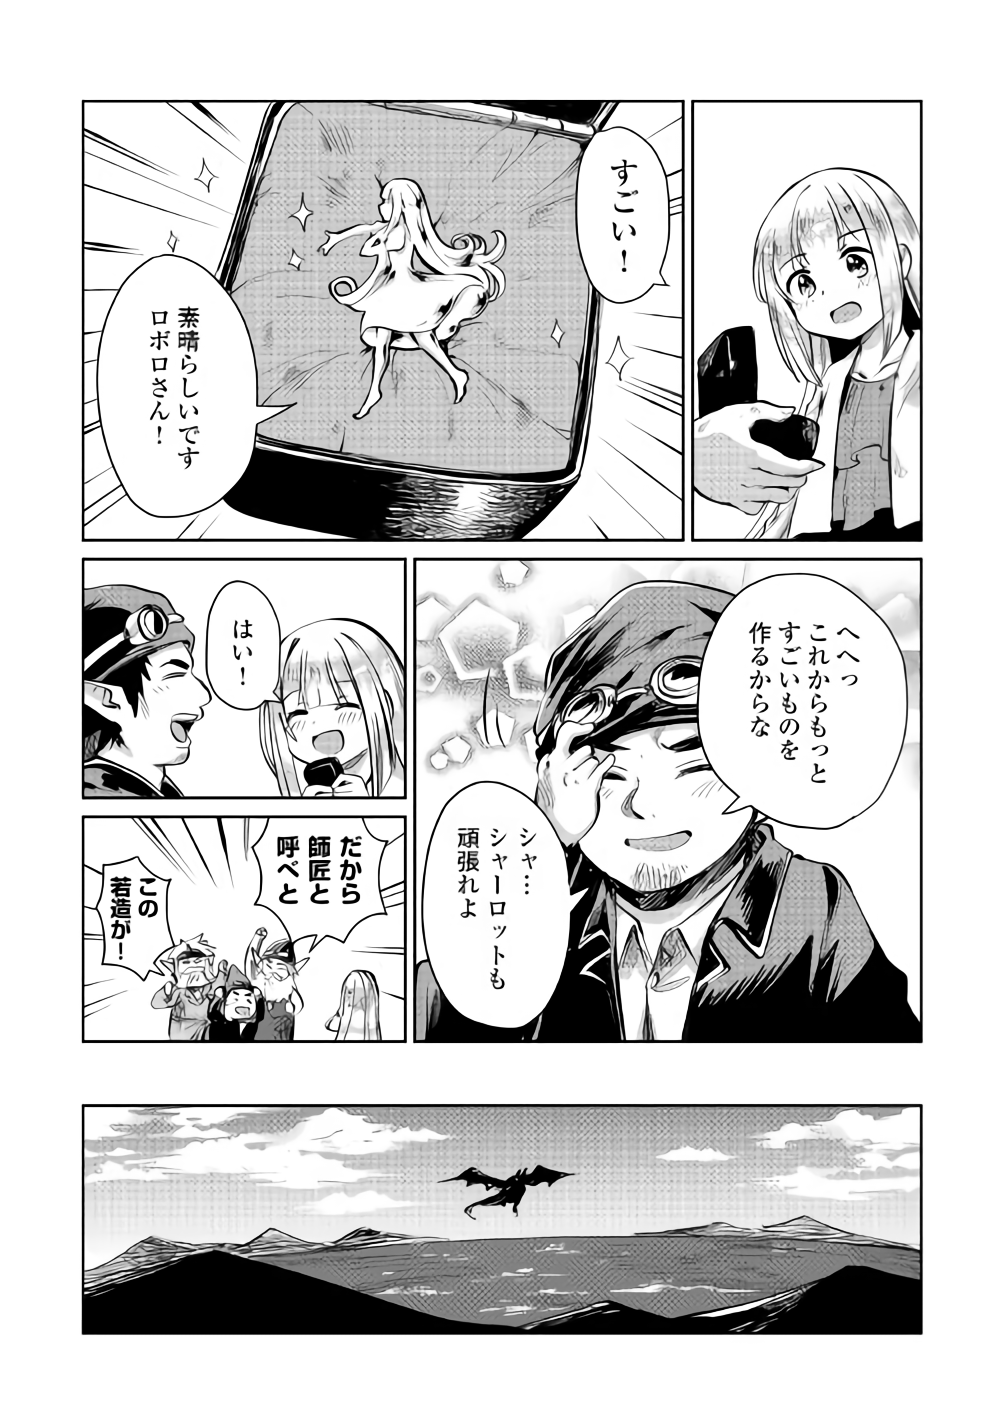 The Former Structural Researcher’s Story of Otherworldly Adventure 第7話 - Page 12